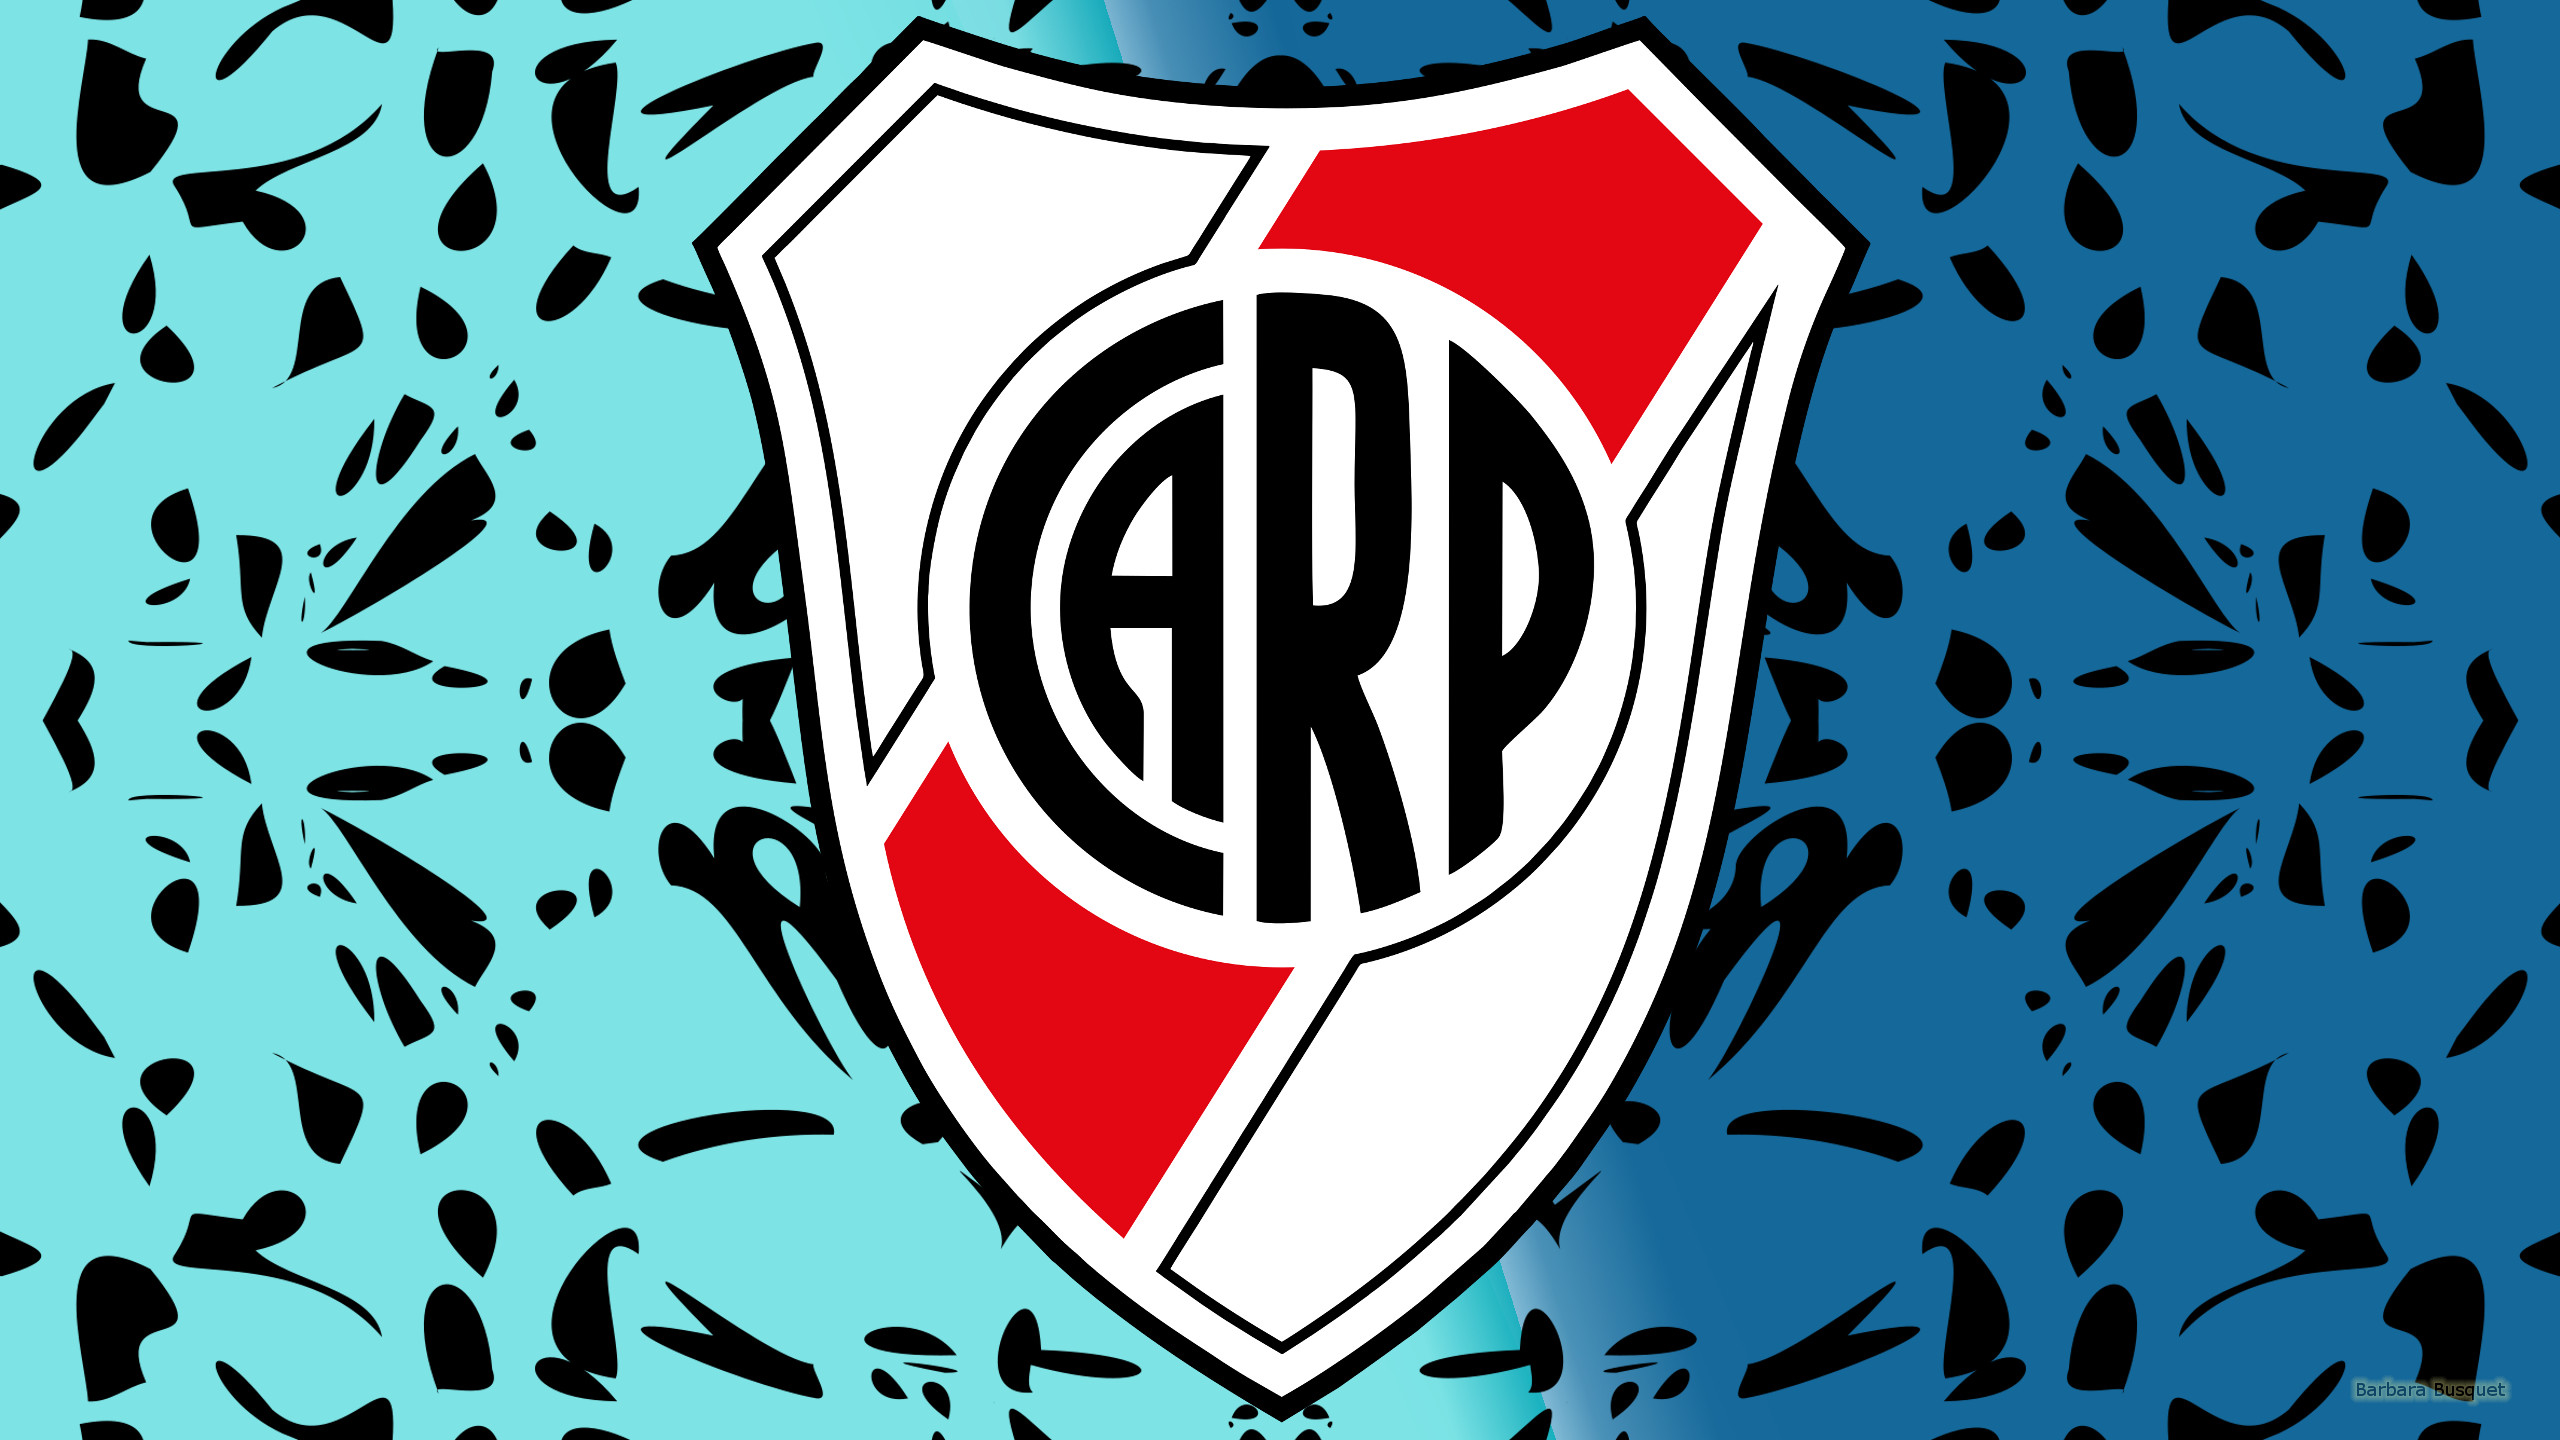 20+ Club Atlético River Plate HD Wallpapers and Backgrounds